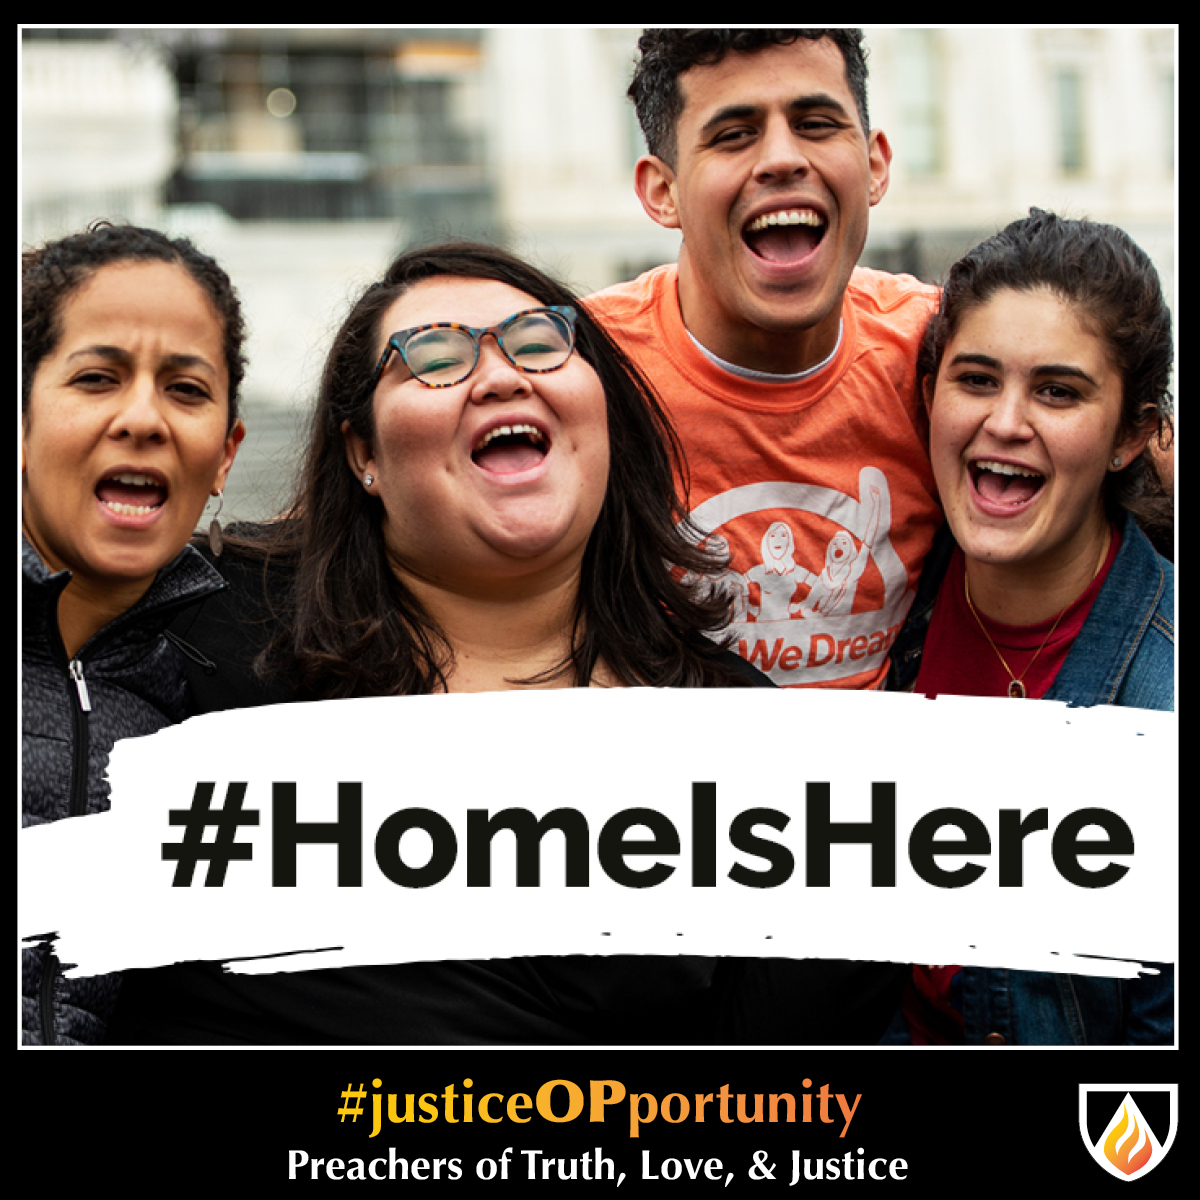 #justiceOPportunity Thursday: March 5, 2020